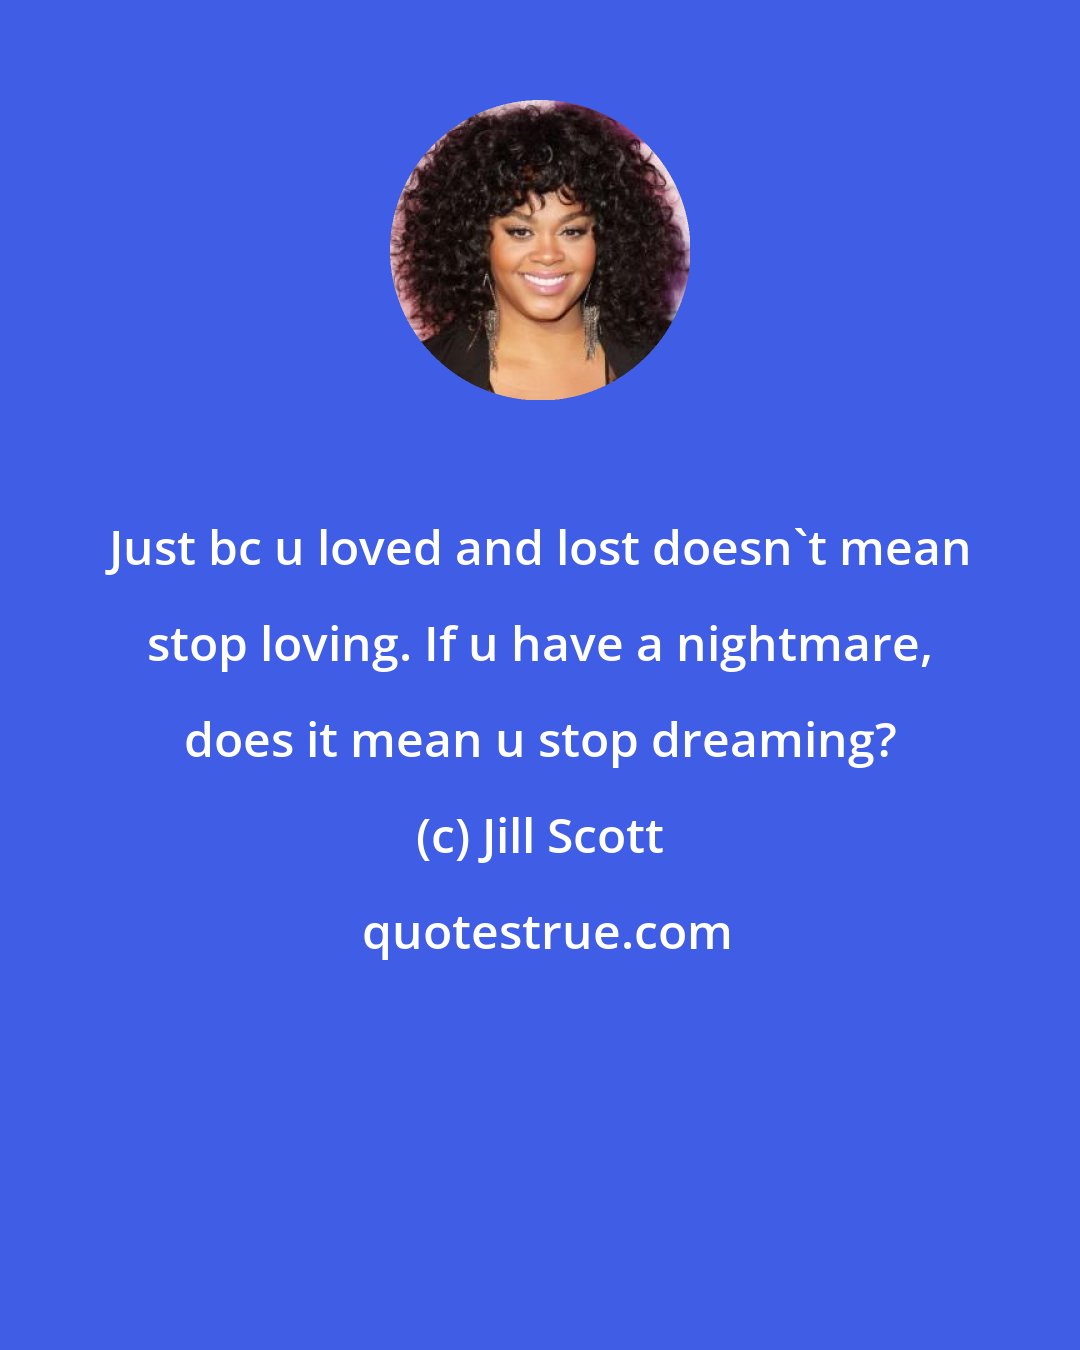 Jill Scott: Just bc u loved and lost doesn't mean stop loving. If u have a nightmare, does it mean u stop dreaming?